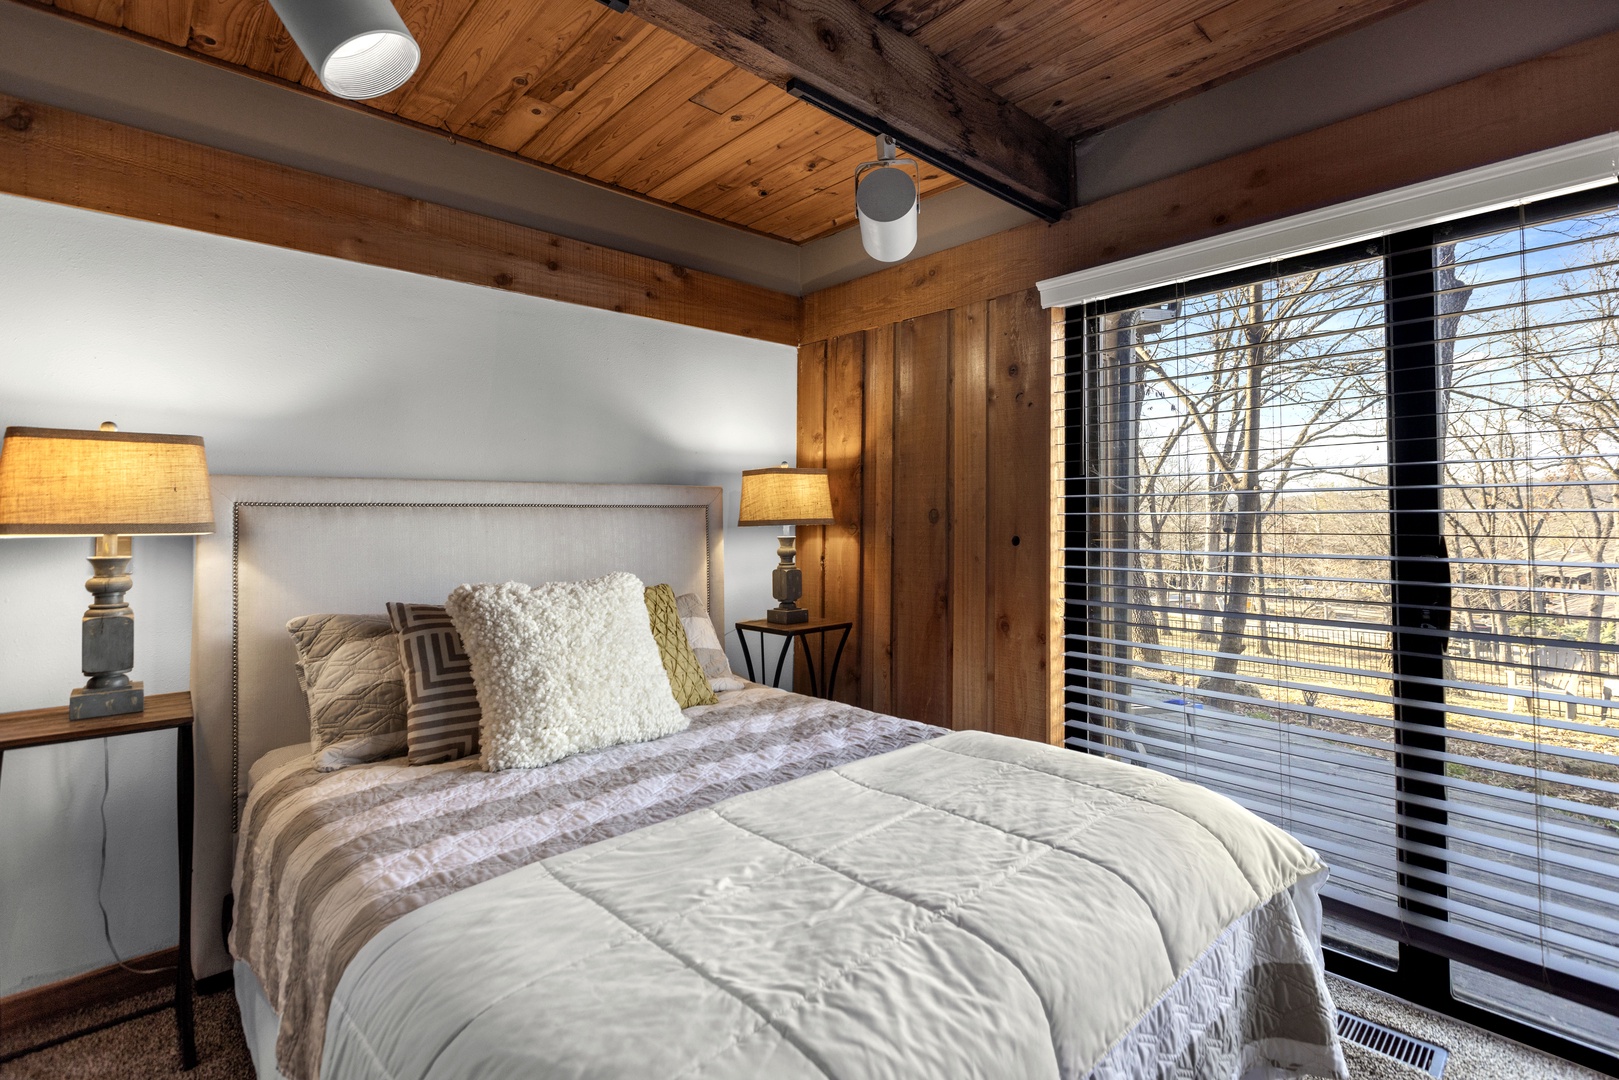 The second queen/twin bedroom sanctuary, offering loads of natural light